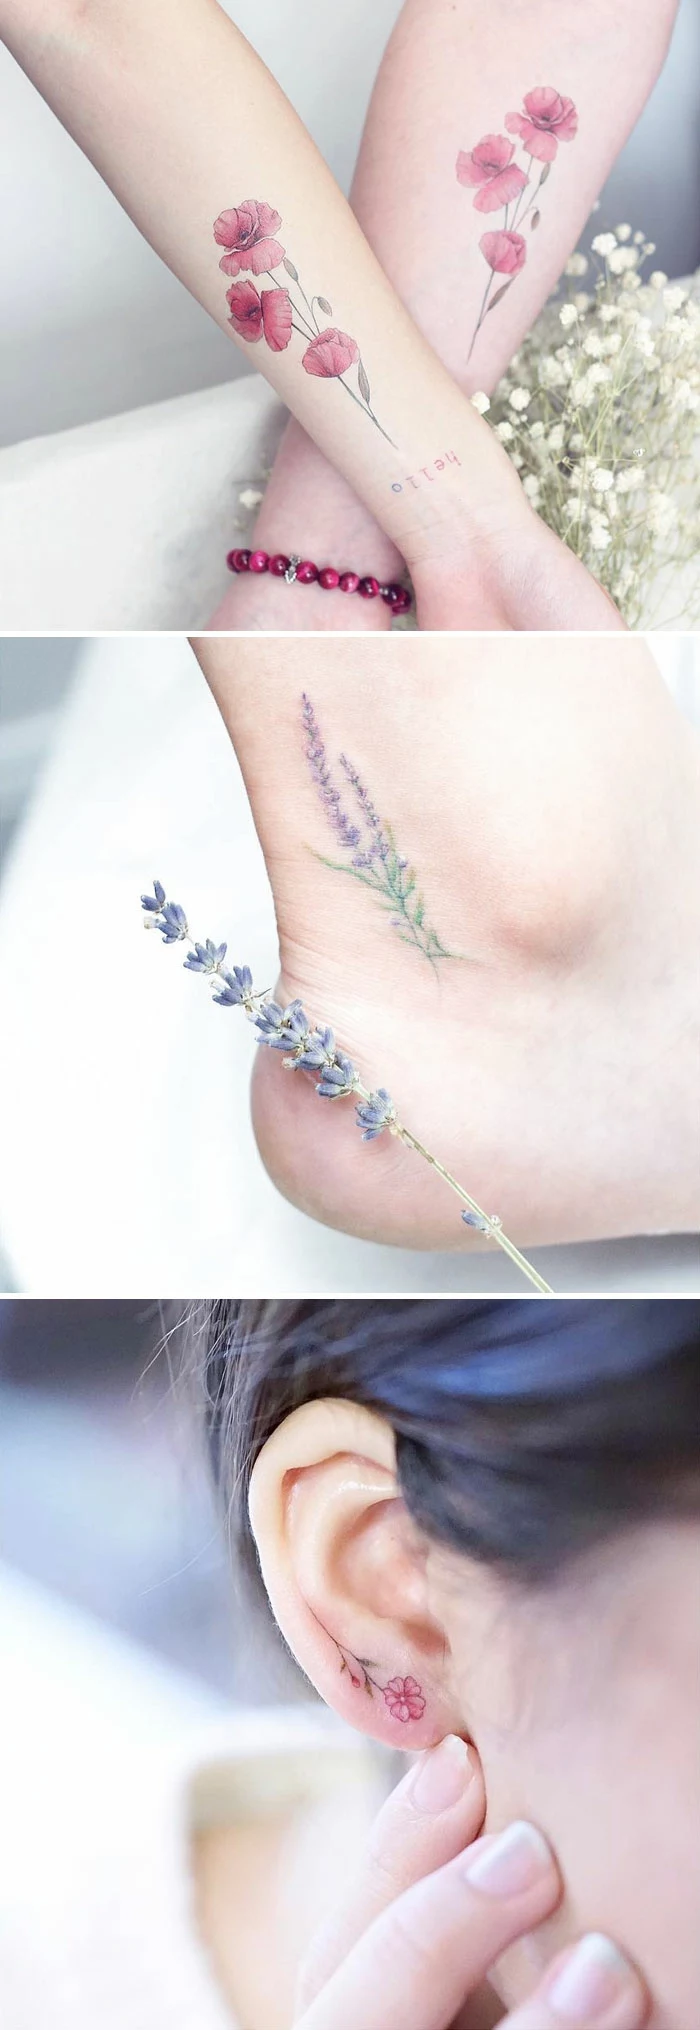 wildflower tattoo, two crossed arms, with identical watercolor-effect poppy tattoos, in red and green, an ankle lavender tattoo in pale violet and green, a tiny ear tattoo, of a pink flower, with thin green stalk